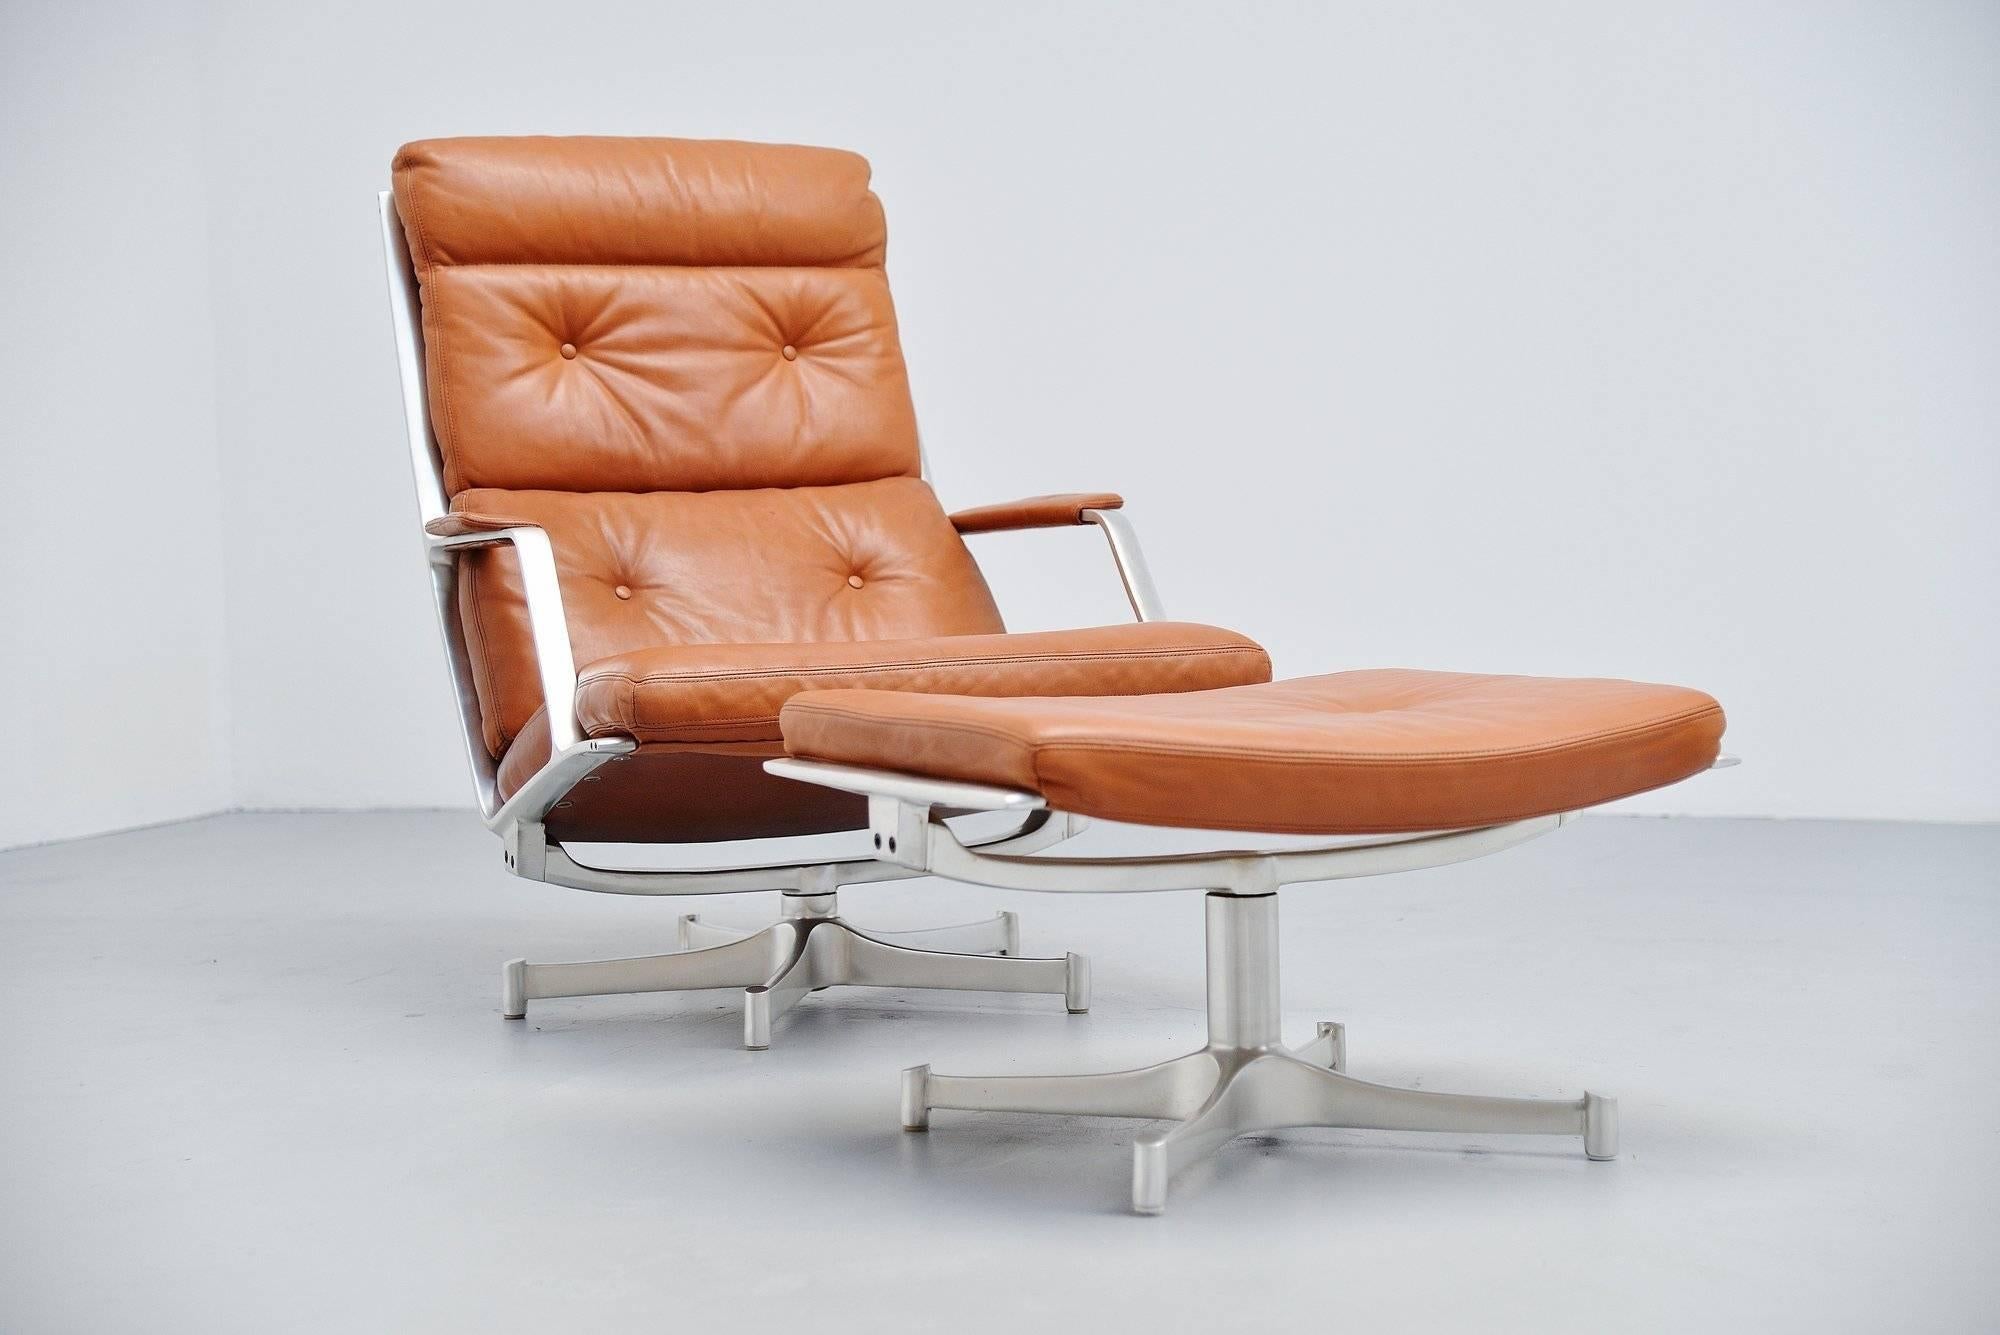 Stunning lounge chair model FK85 designed by Preben Fabricius & Jorgen Kastholm and manufactured by Kill International, Germany 1963. This chair has a heavy solid brushed steel frame and is covered with lovely cognac leather. The leather is in